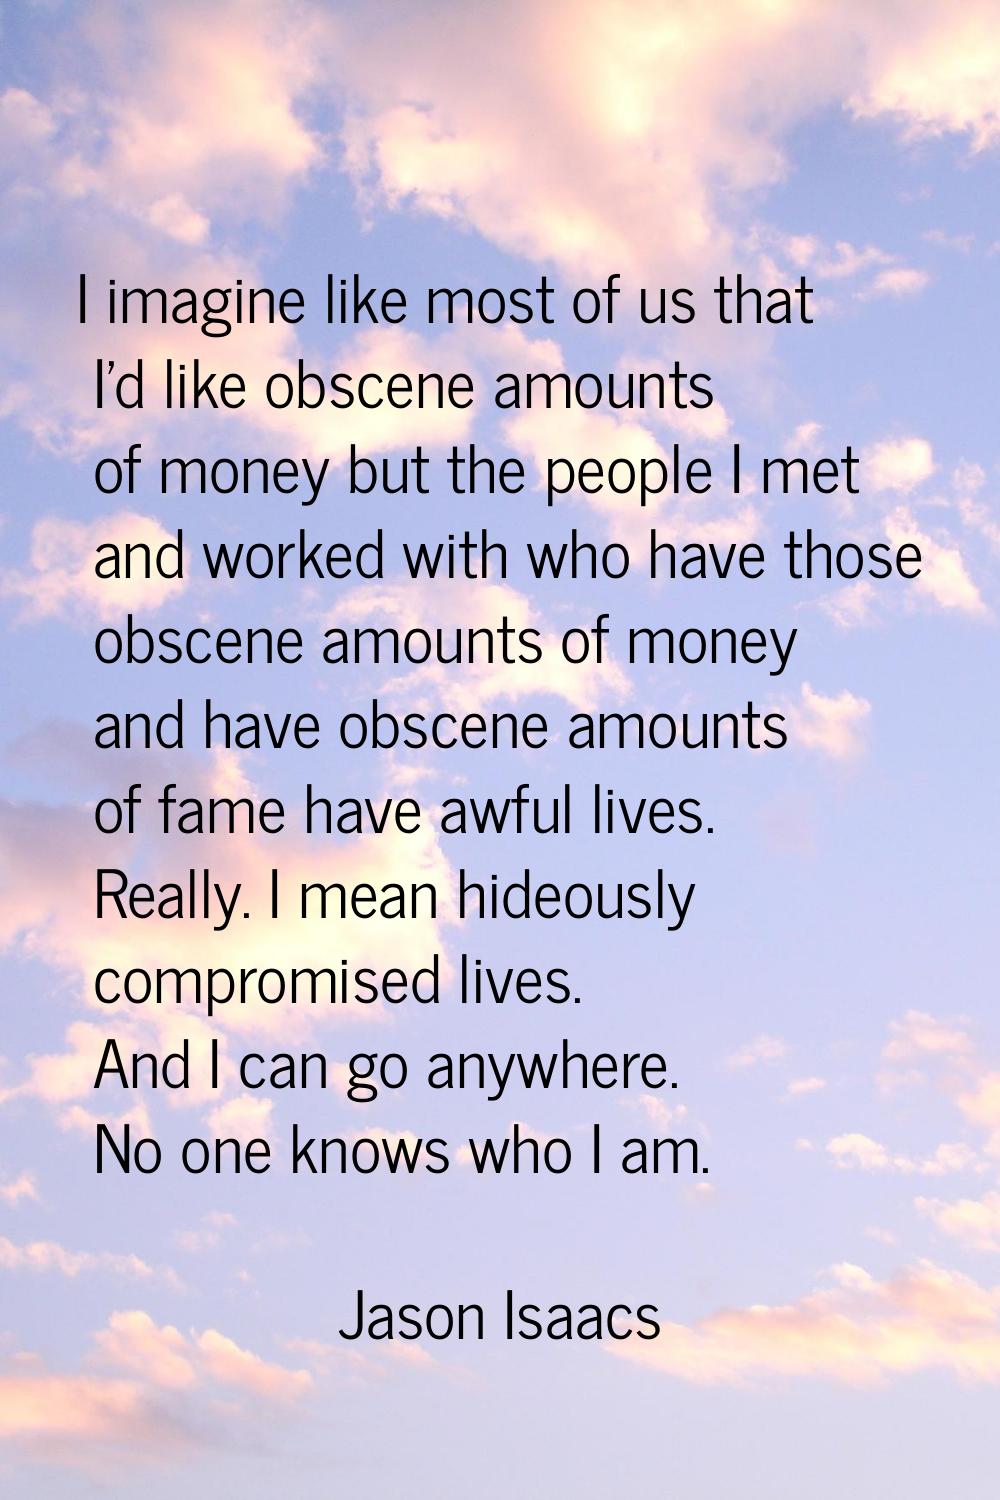 I imagine like most of us that I'd like obscene amounts of money but the people I met and worked wi